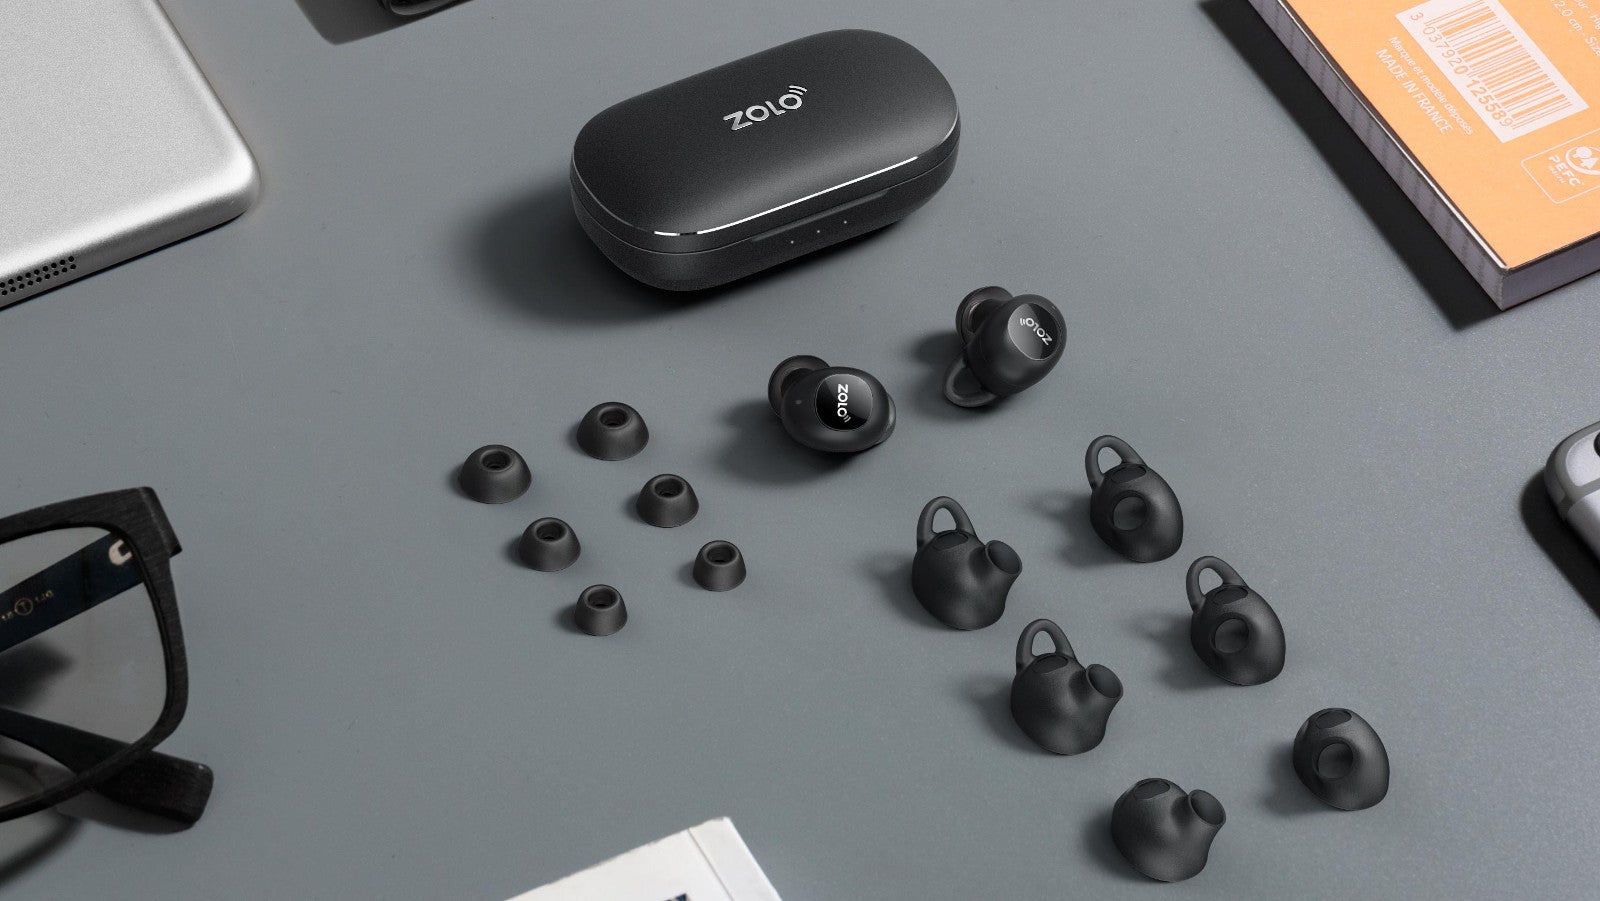 Anker-backed startup to launch super-tough, fully wireless smart earphones